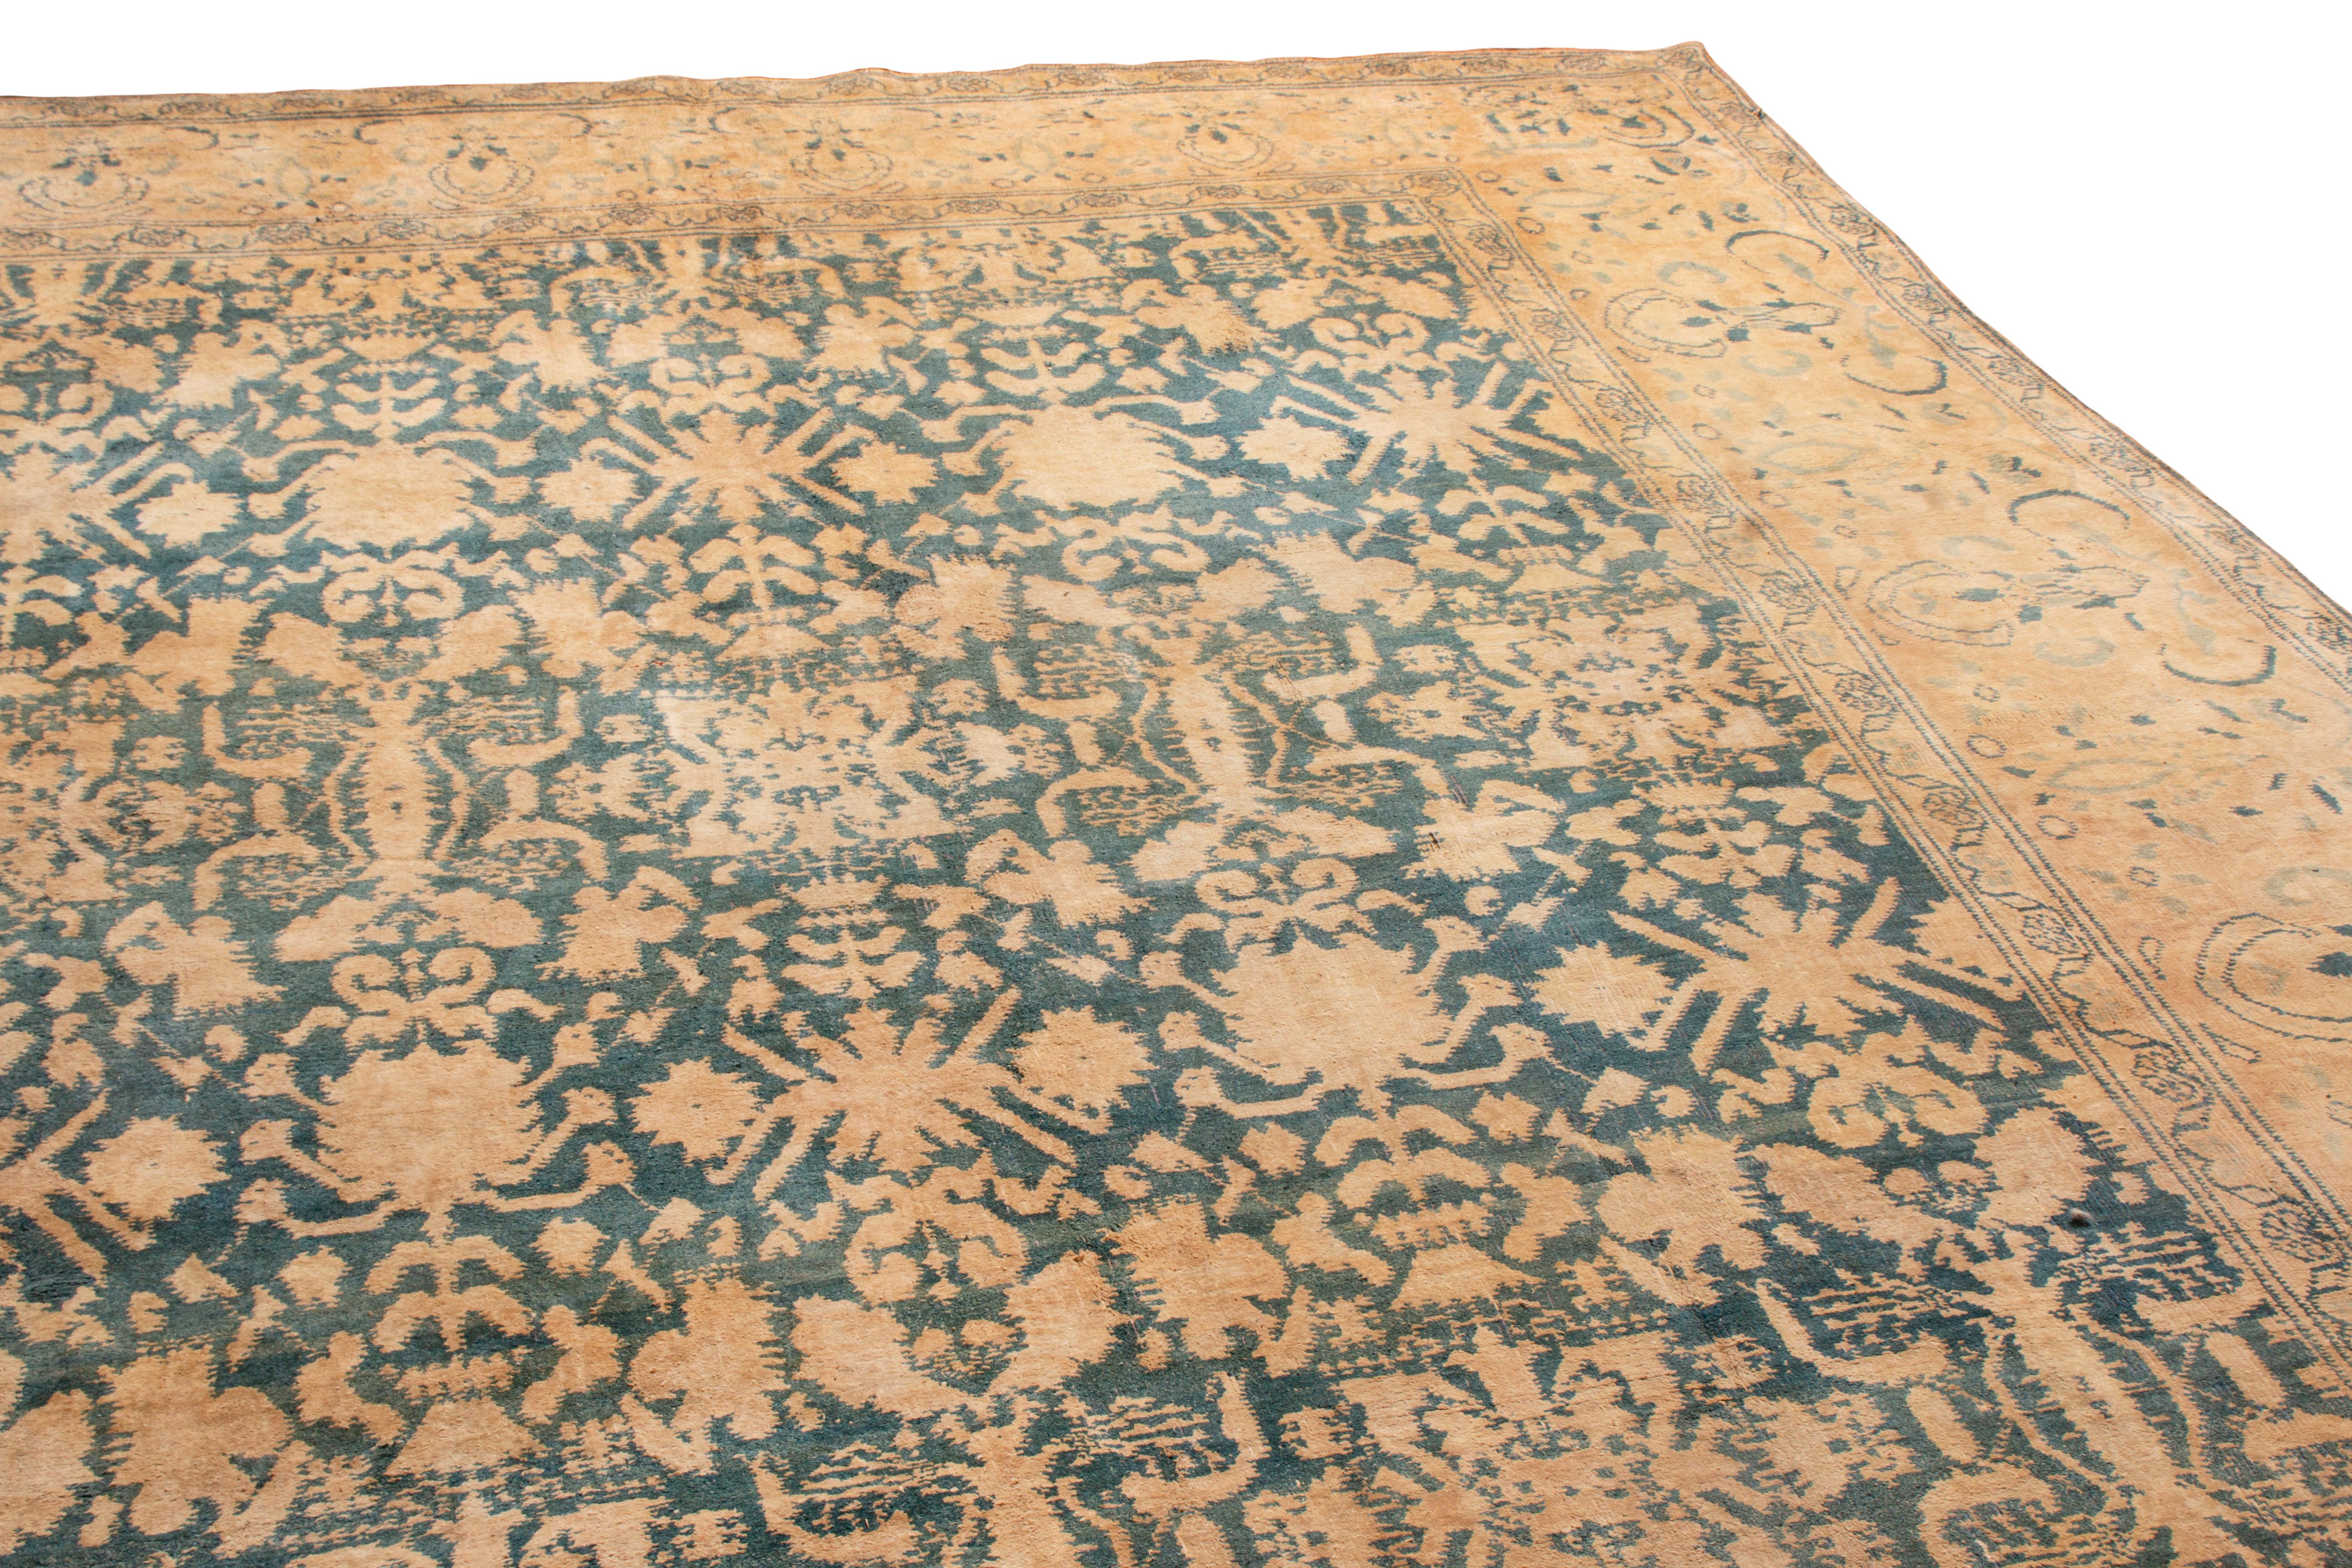 This antique traditional Indian rug has a geometric-floral pattern in cotton weave. From 1920, the maharajahs of India would typically use this in their homes in the summertime. The cotton Agra is extremely durable against distress, as shown in the